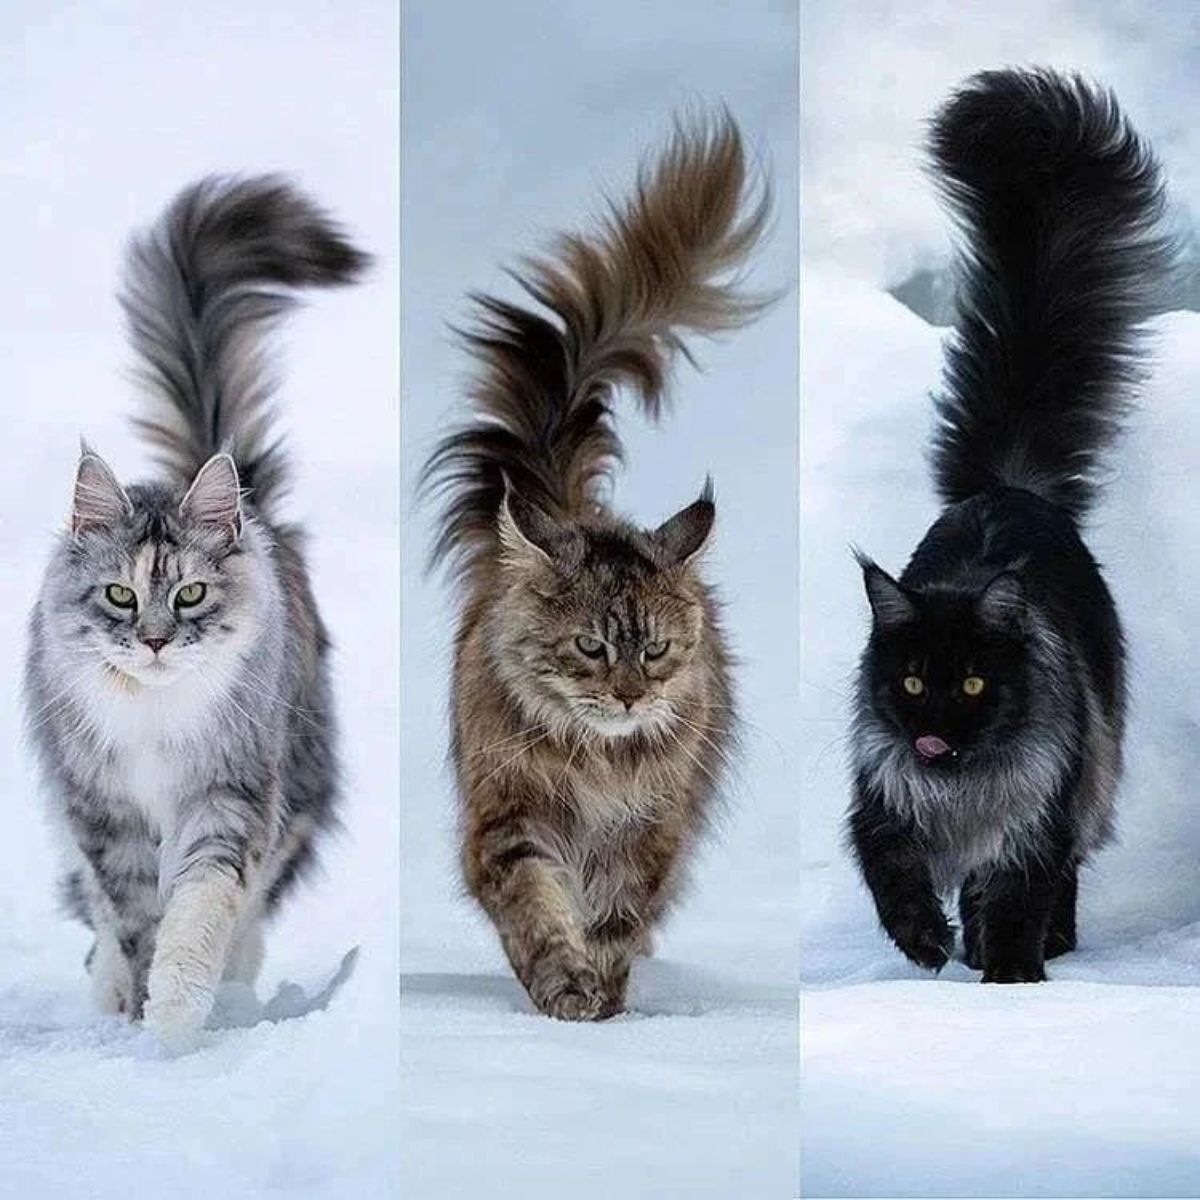 Three images of maine coons walking on the snow.